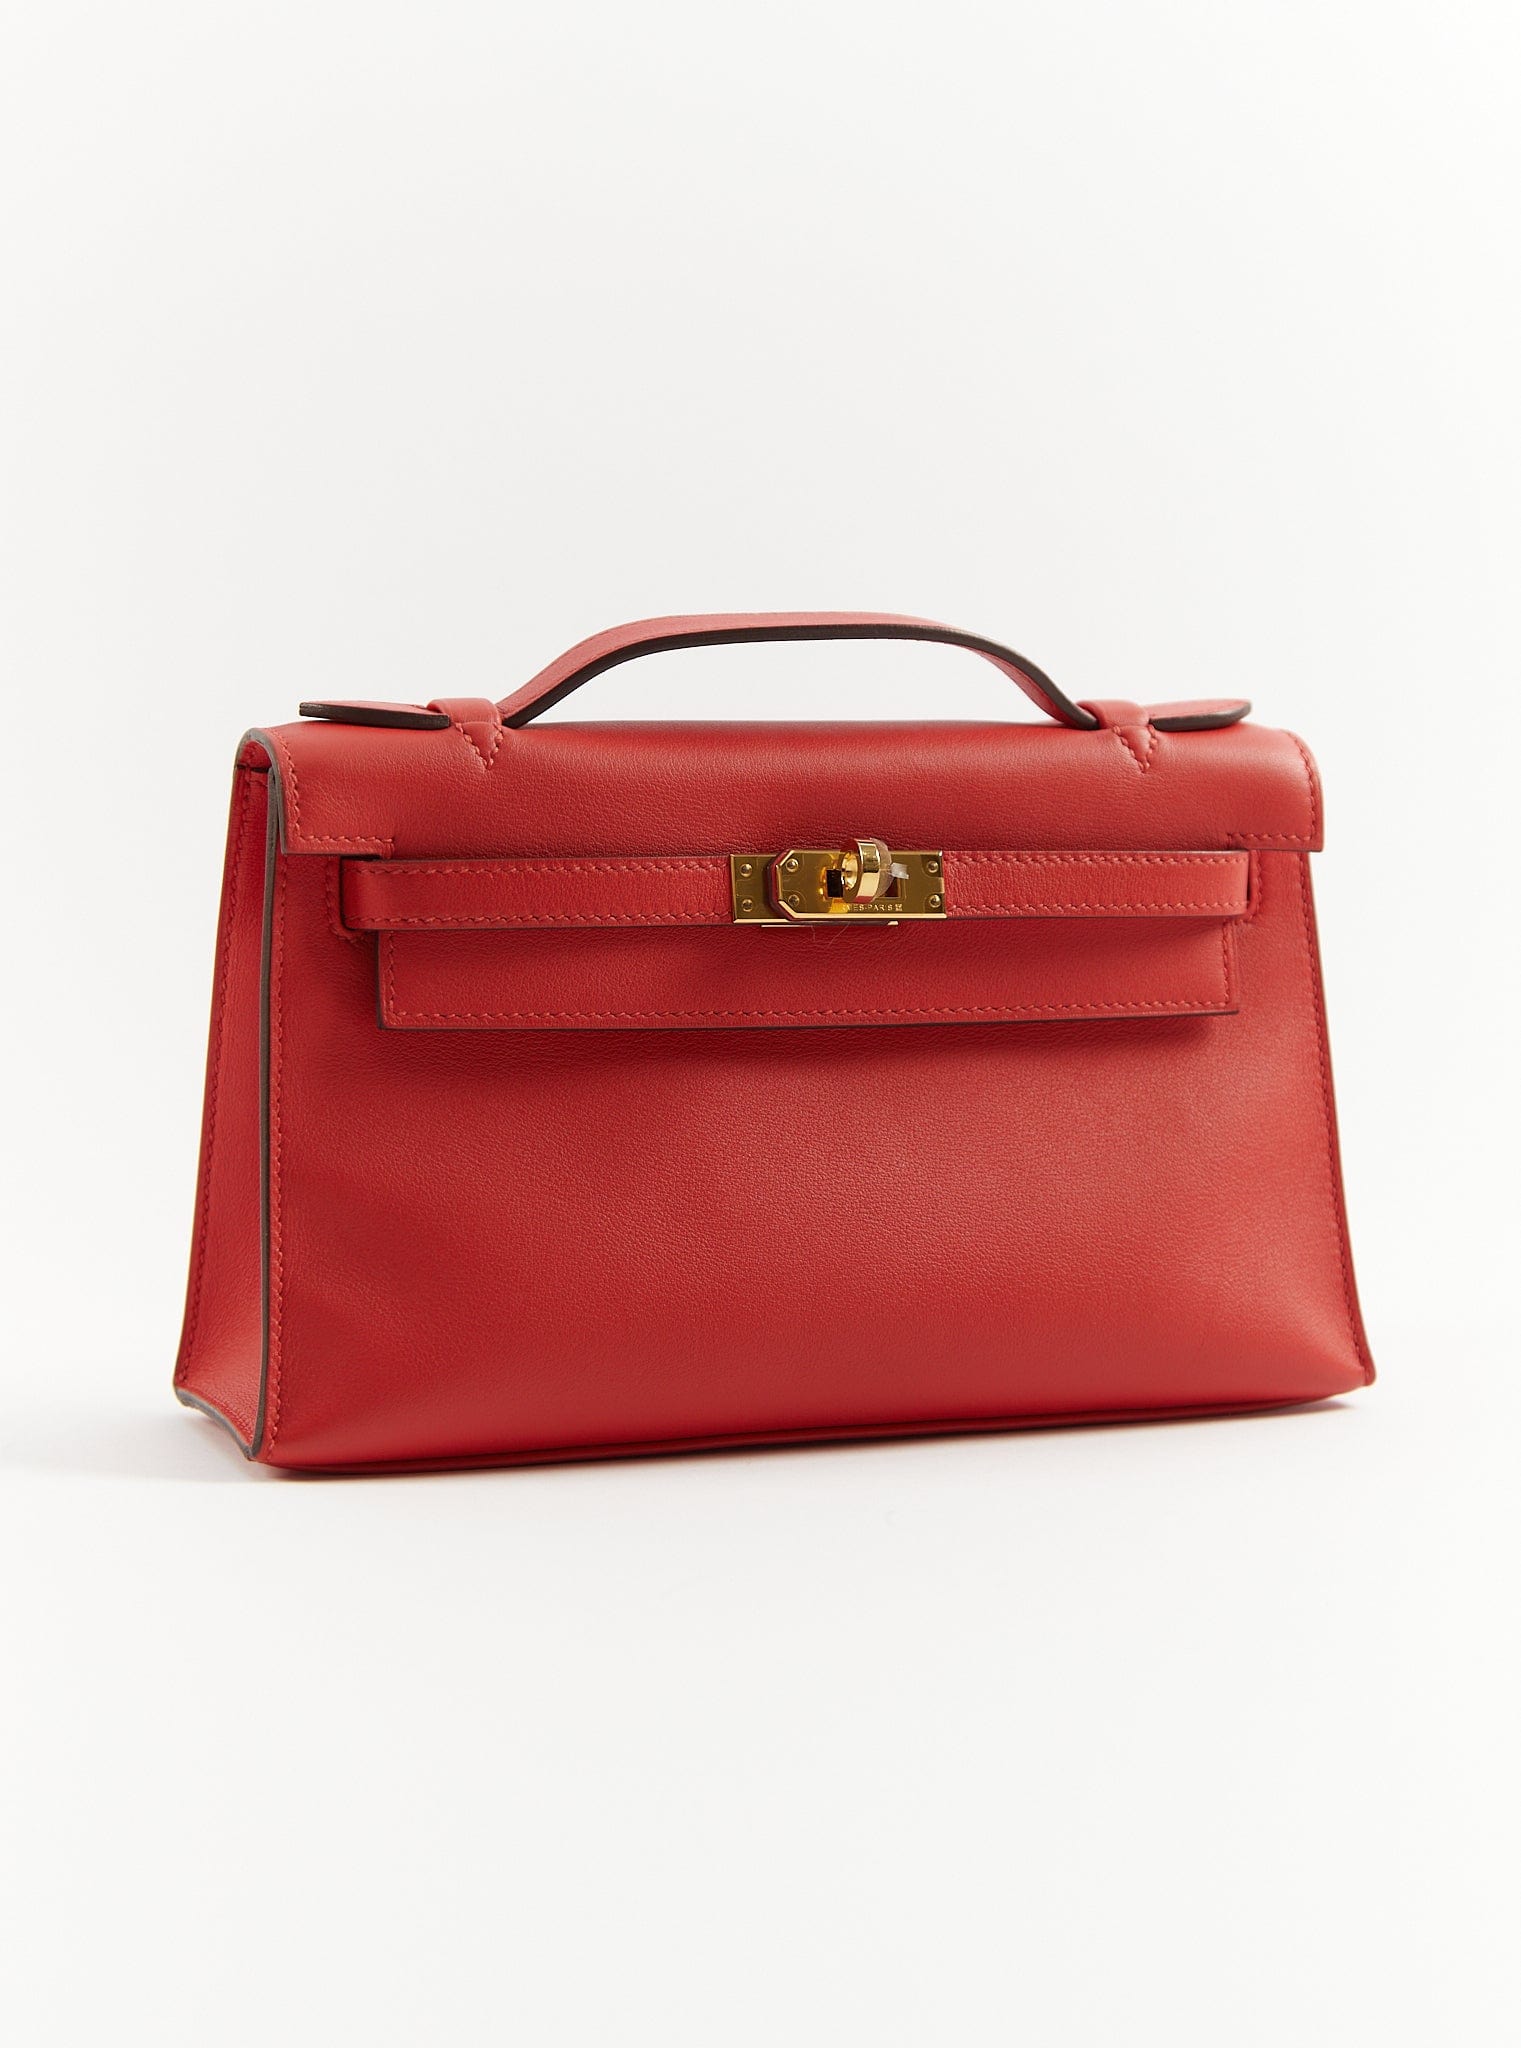 Hermès PRELOVED RARE HERMÈS KELLY POCHETTE ROUGE TOMATE Swift Leather with Gold Hardware